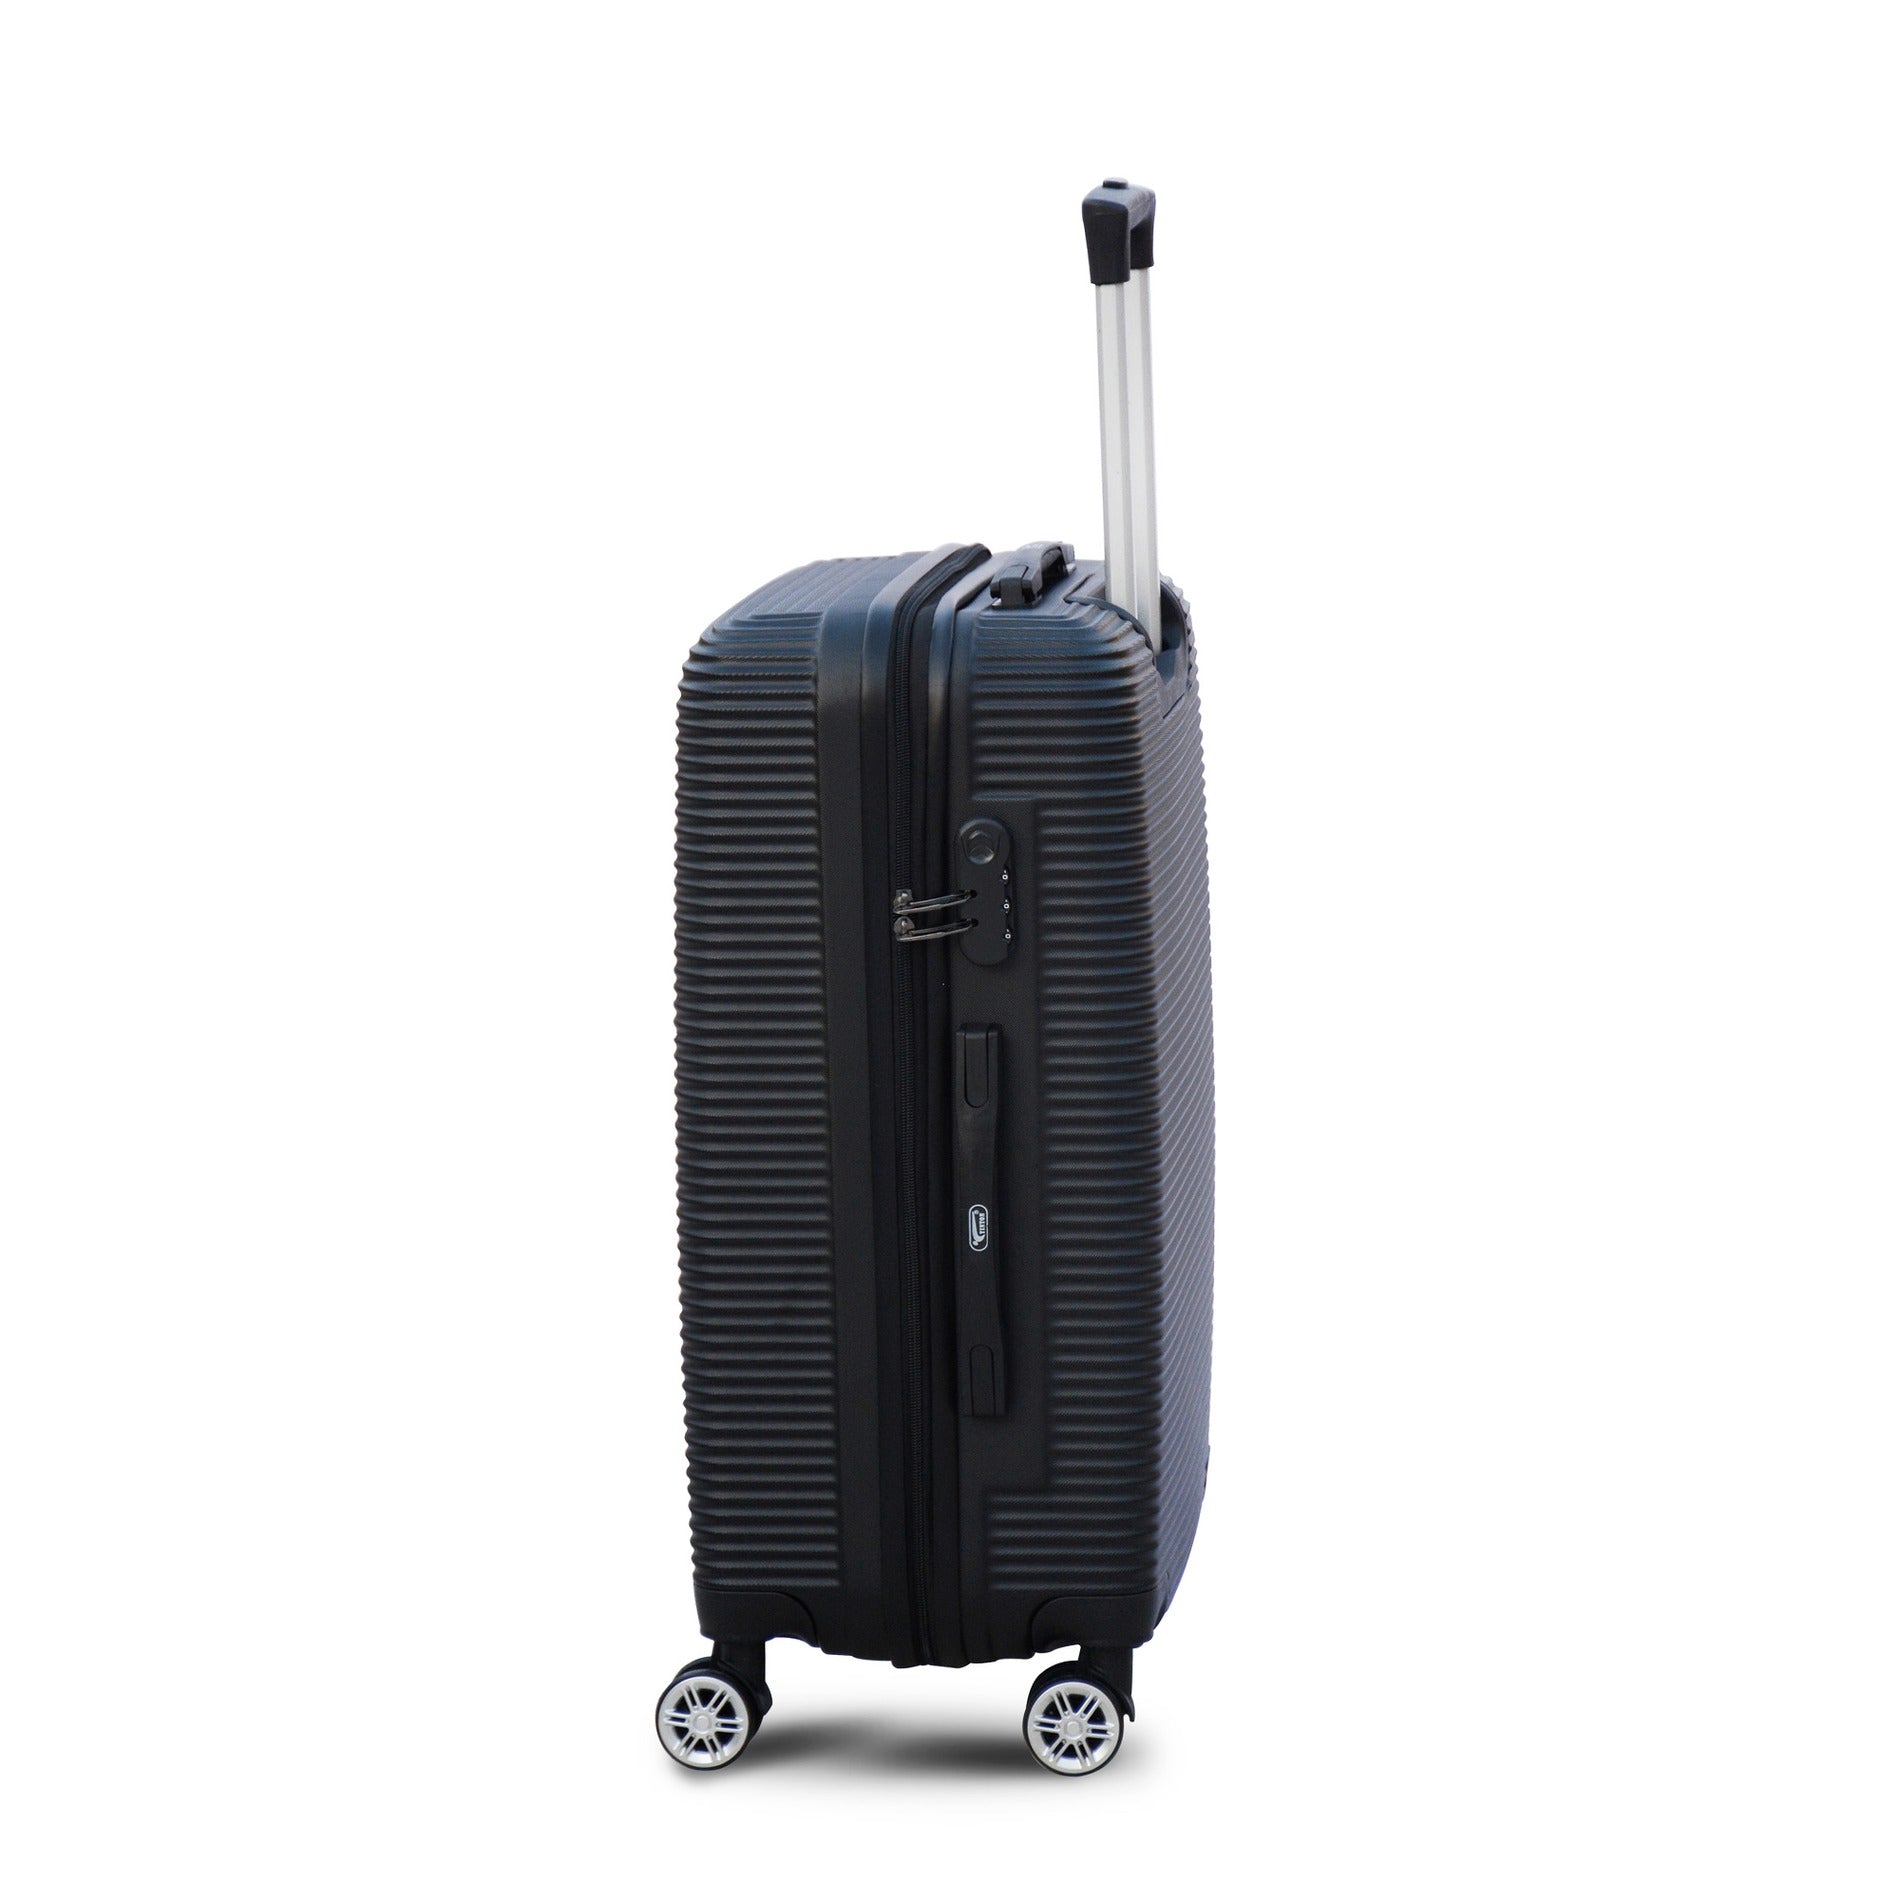 28" Black Colour JIAN ABS Line Luggage Lightweight Hard Case Trolley Bag With Spinner Wheel